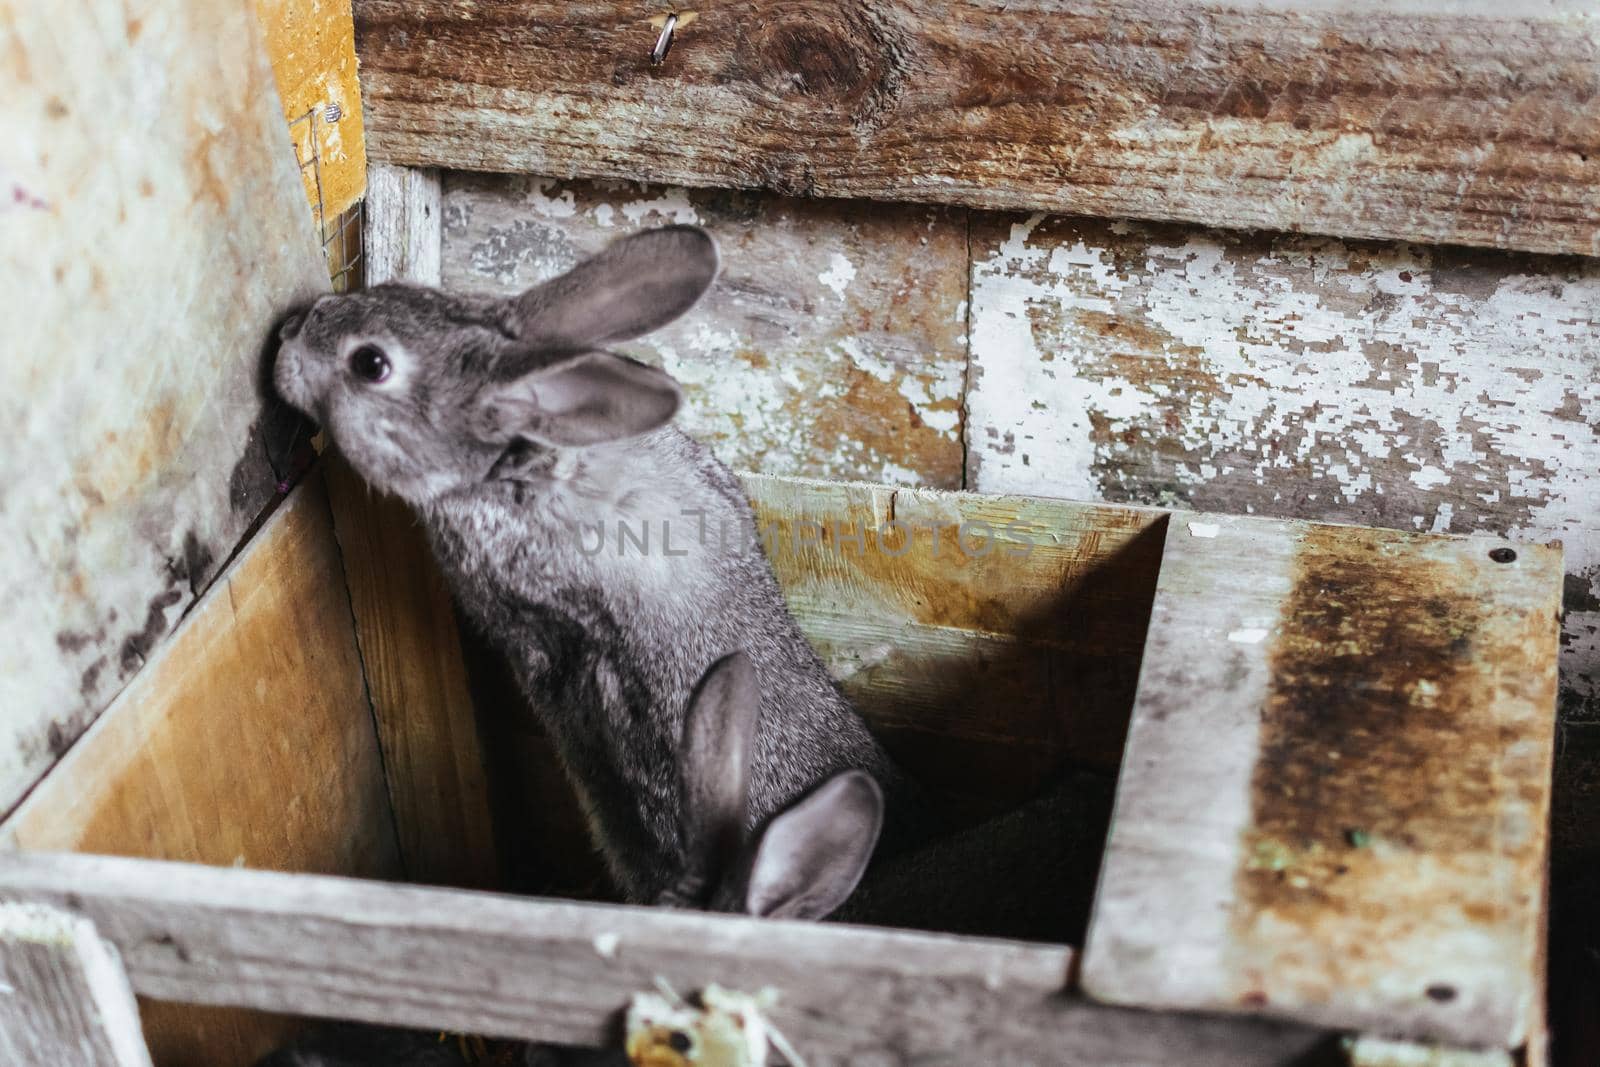 A gray young rabbit trying to get out of his house. Breeding rabbits. Rabbits on the farm in a wooden cage. by Alla_Morozova93